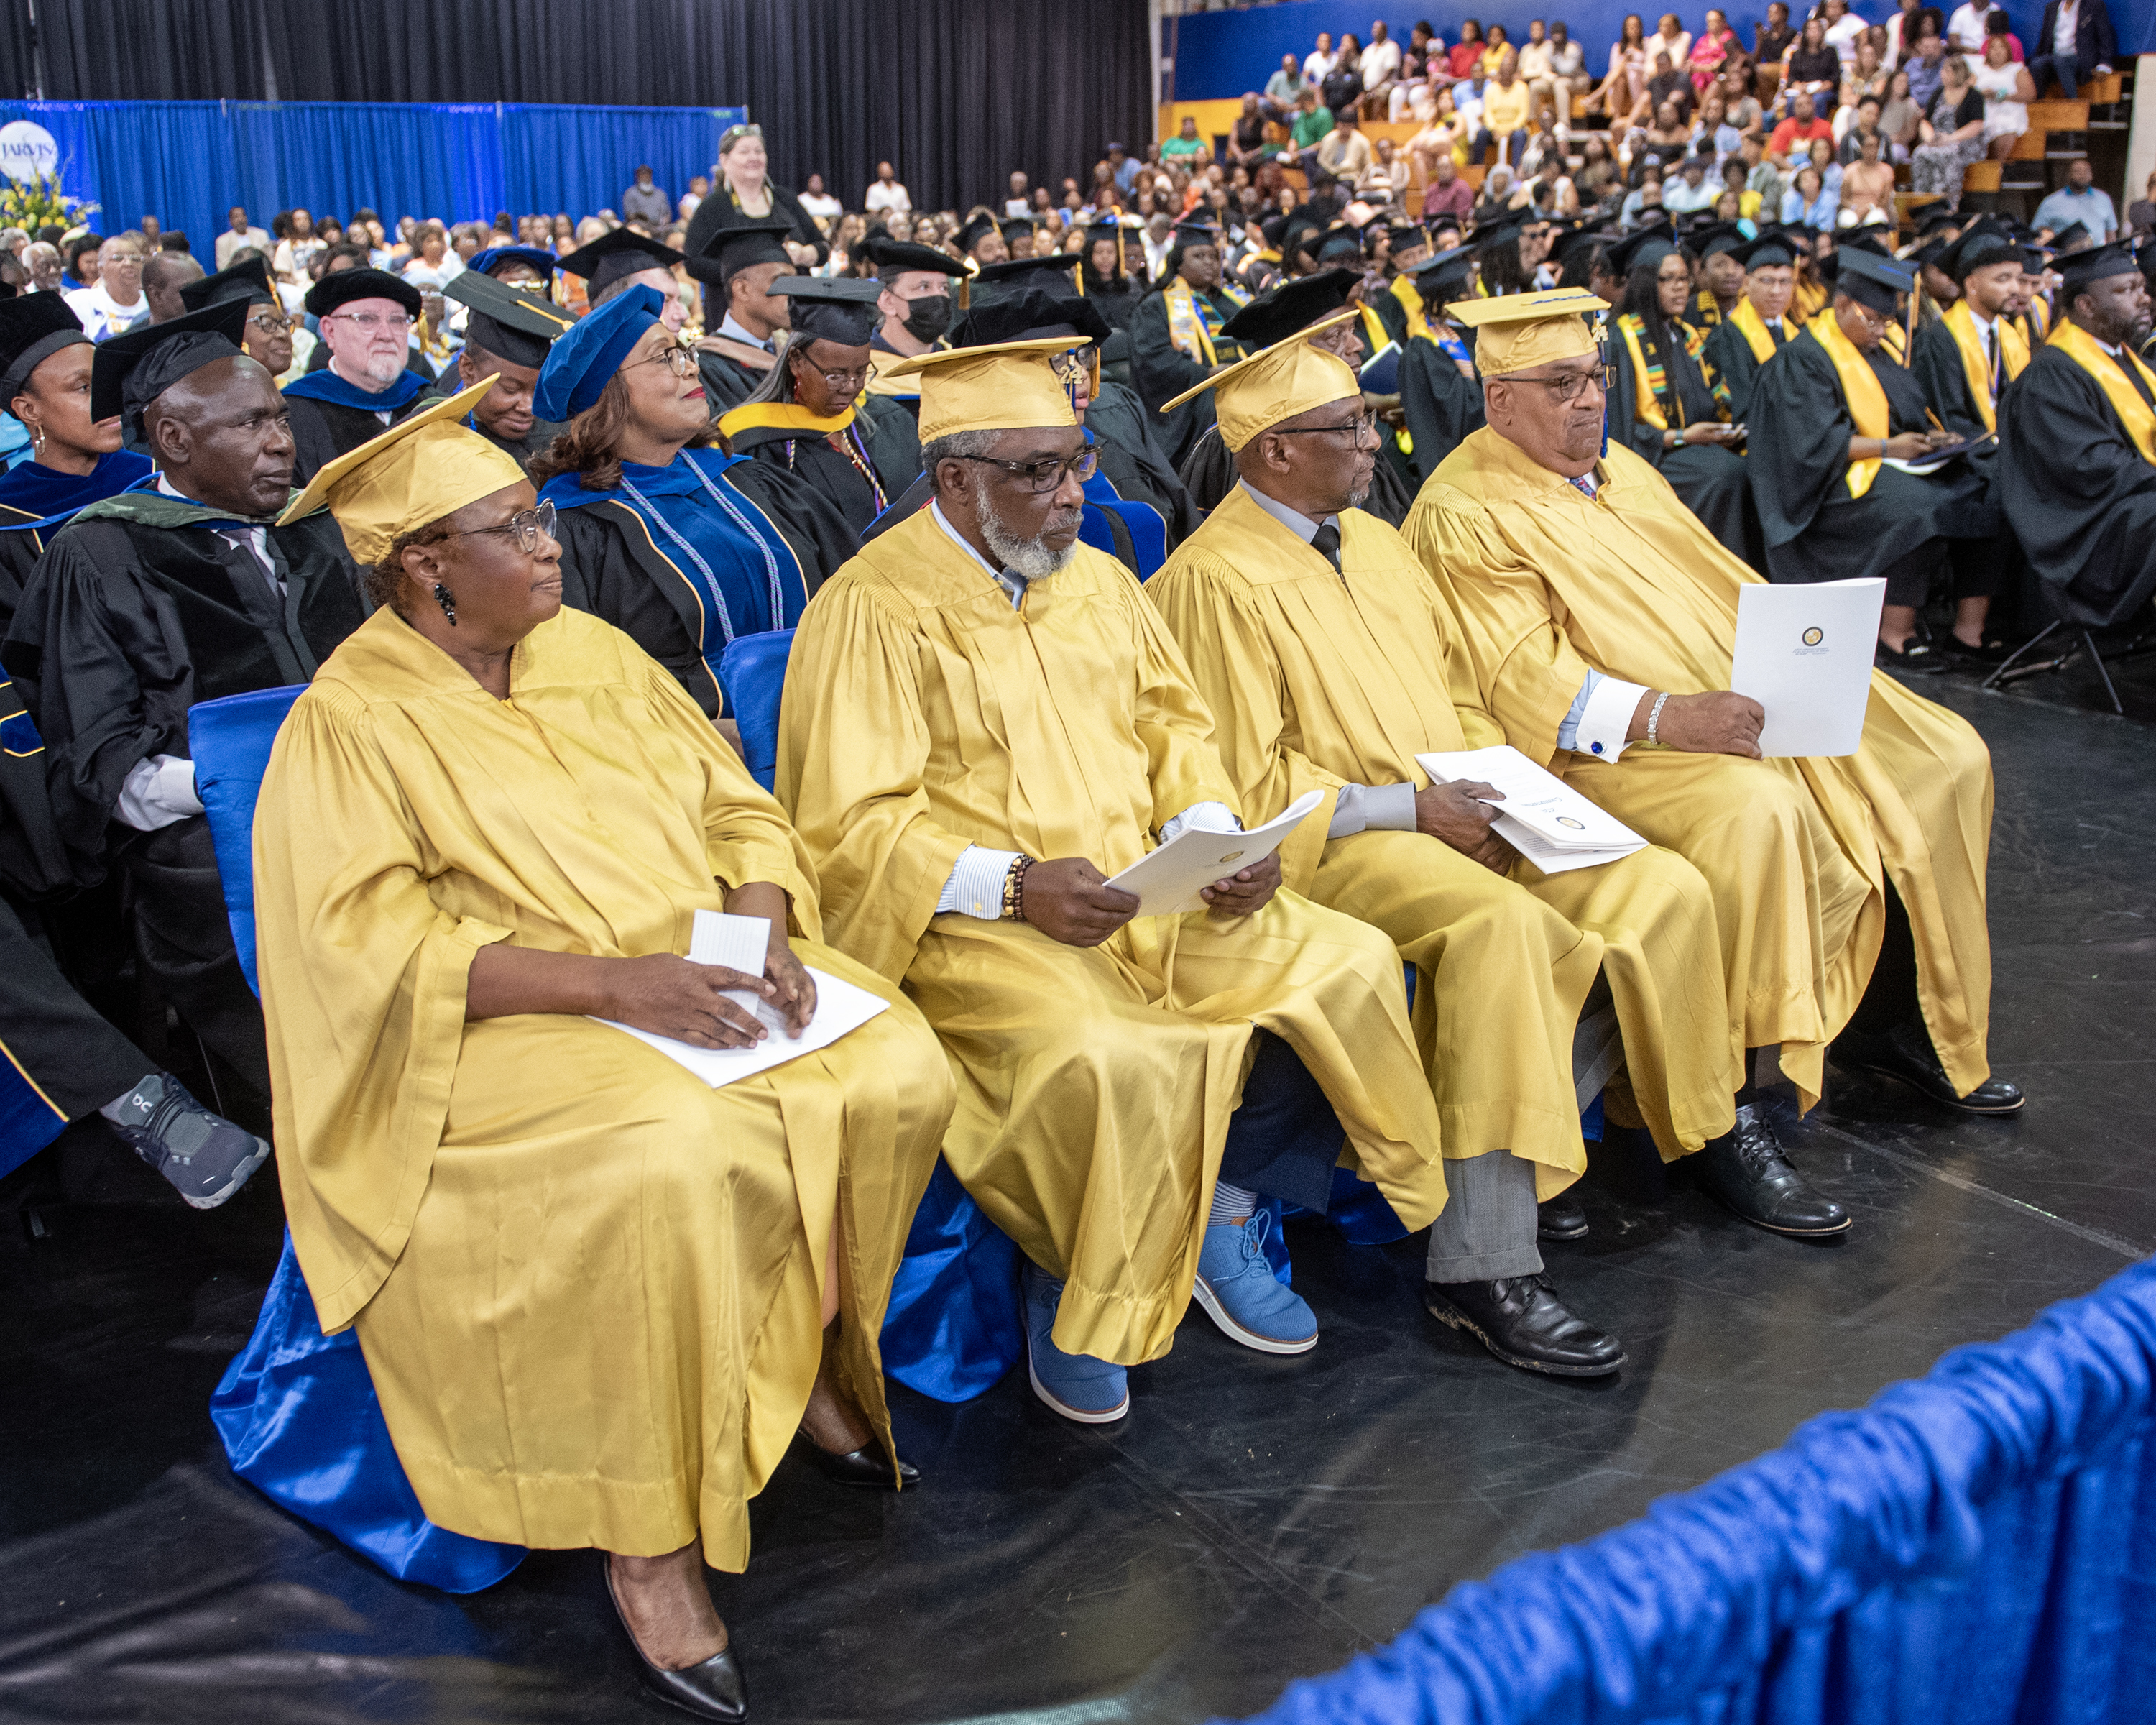 Golden Bulldogs, graduates from 1974, returned to celebrate their golden graduation anniversary.